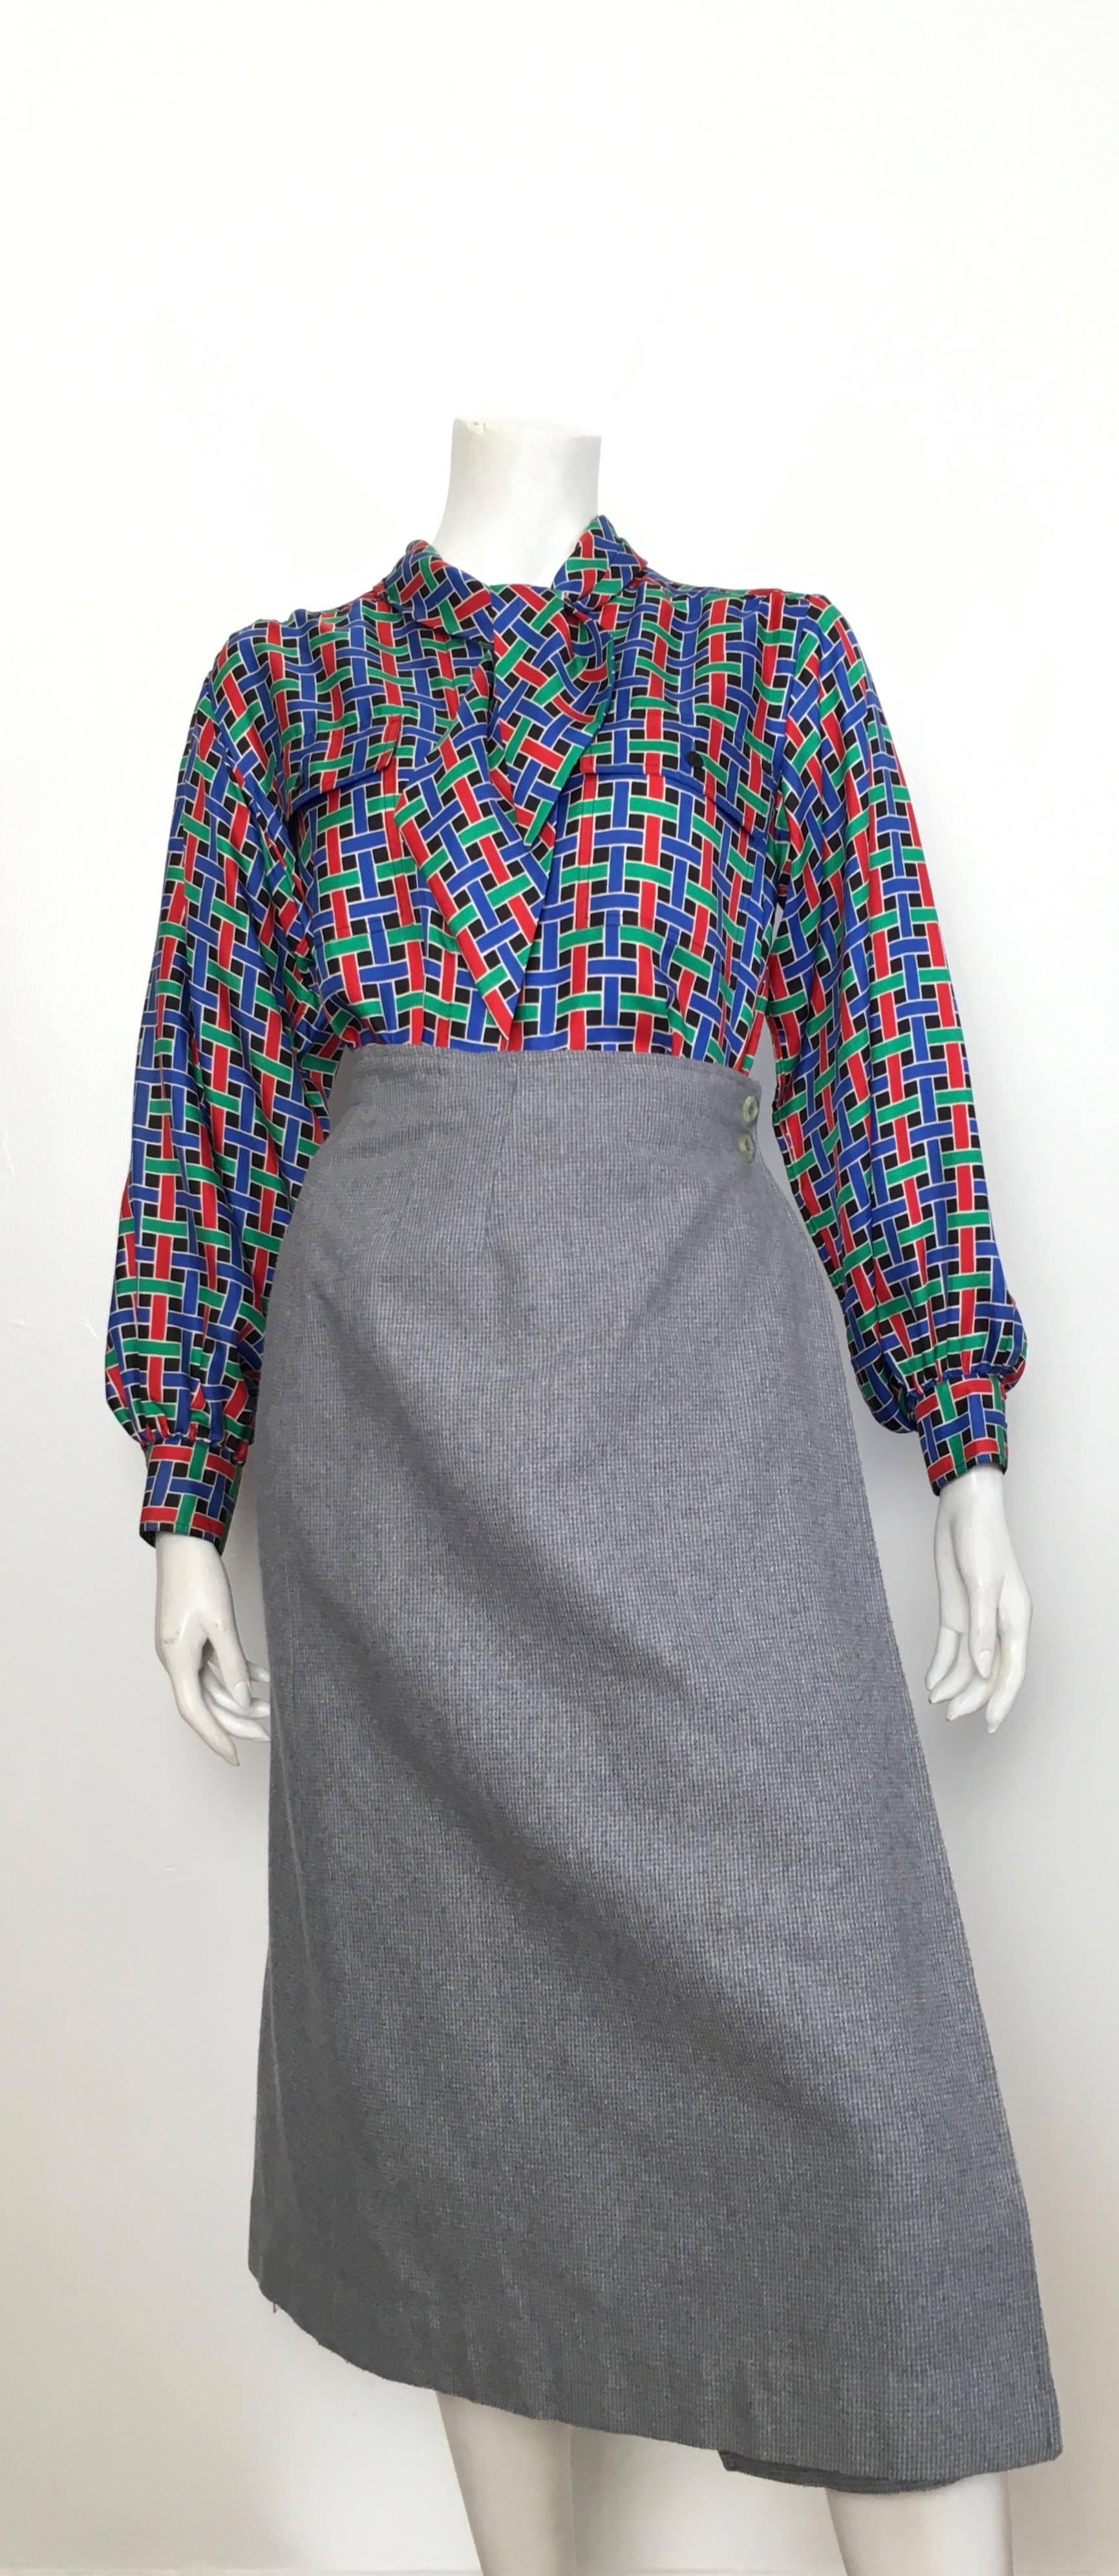 Intuitions by Maurice Antaya 1970s blue / grey wool houndstooth wrap skirt is a size 4.  Maurice Antaya was known for helping Donna Karan and Louis Dell'Olio design for Anne Klein. His designs were simple & very chic not to mention timeless.